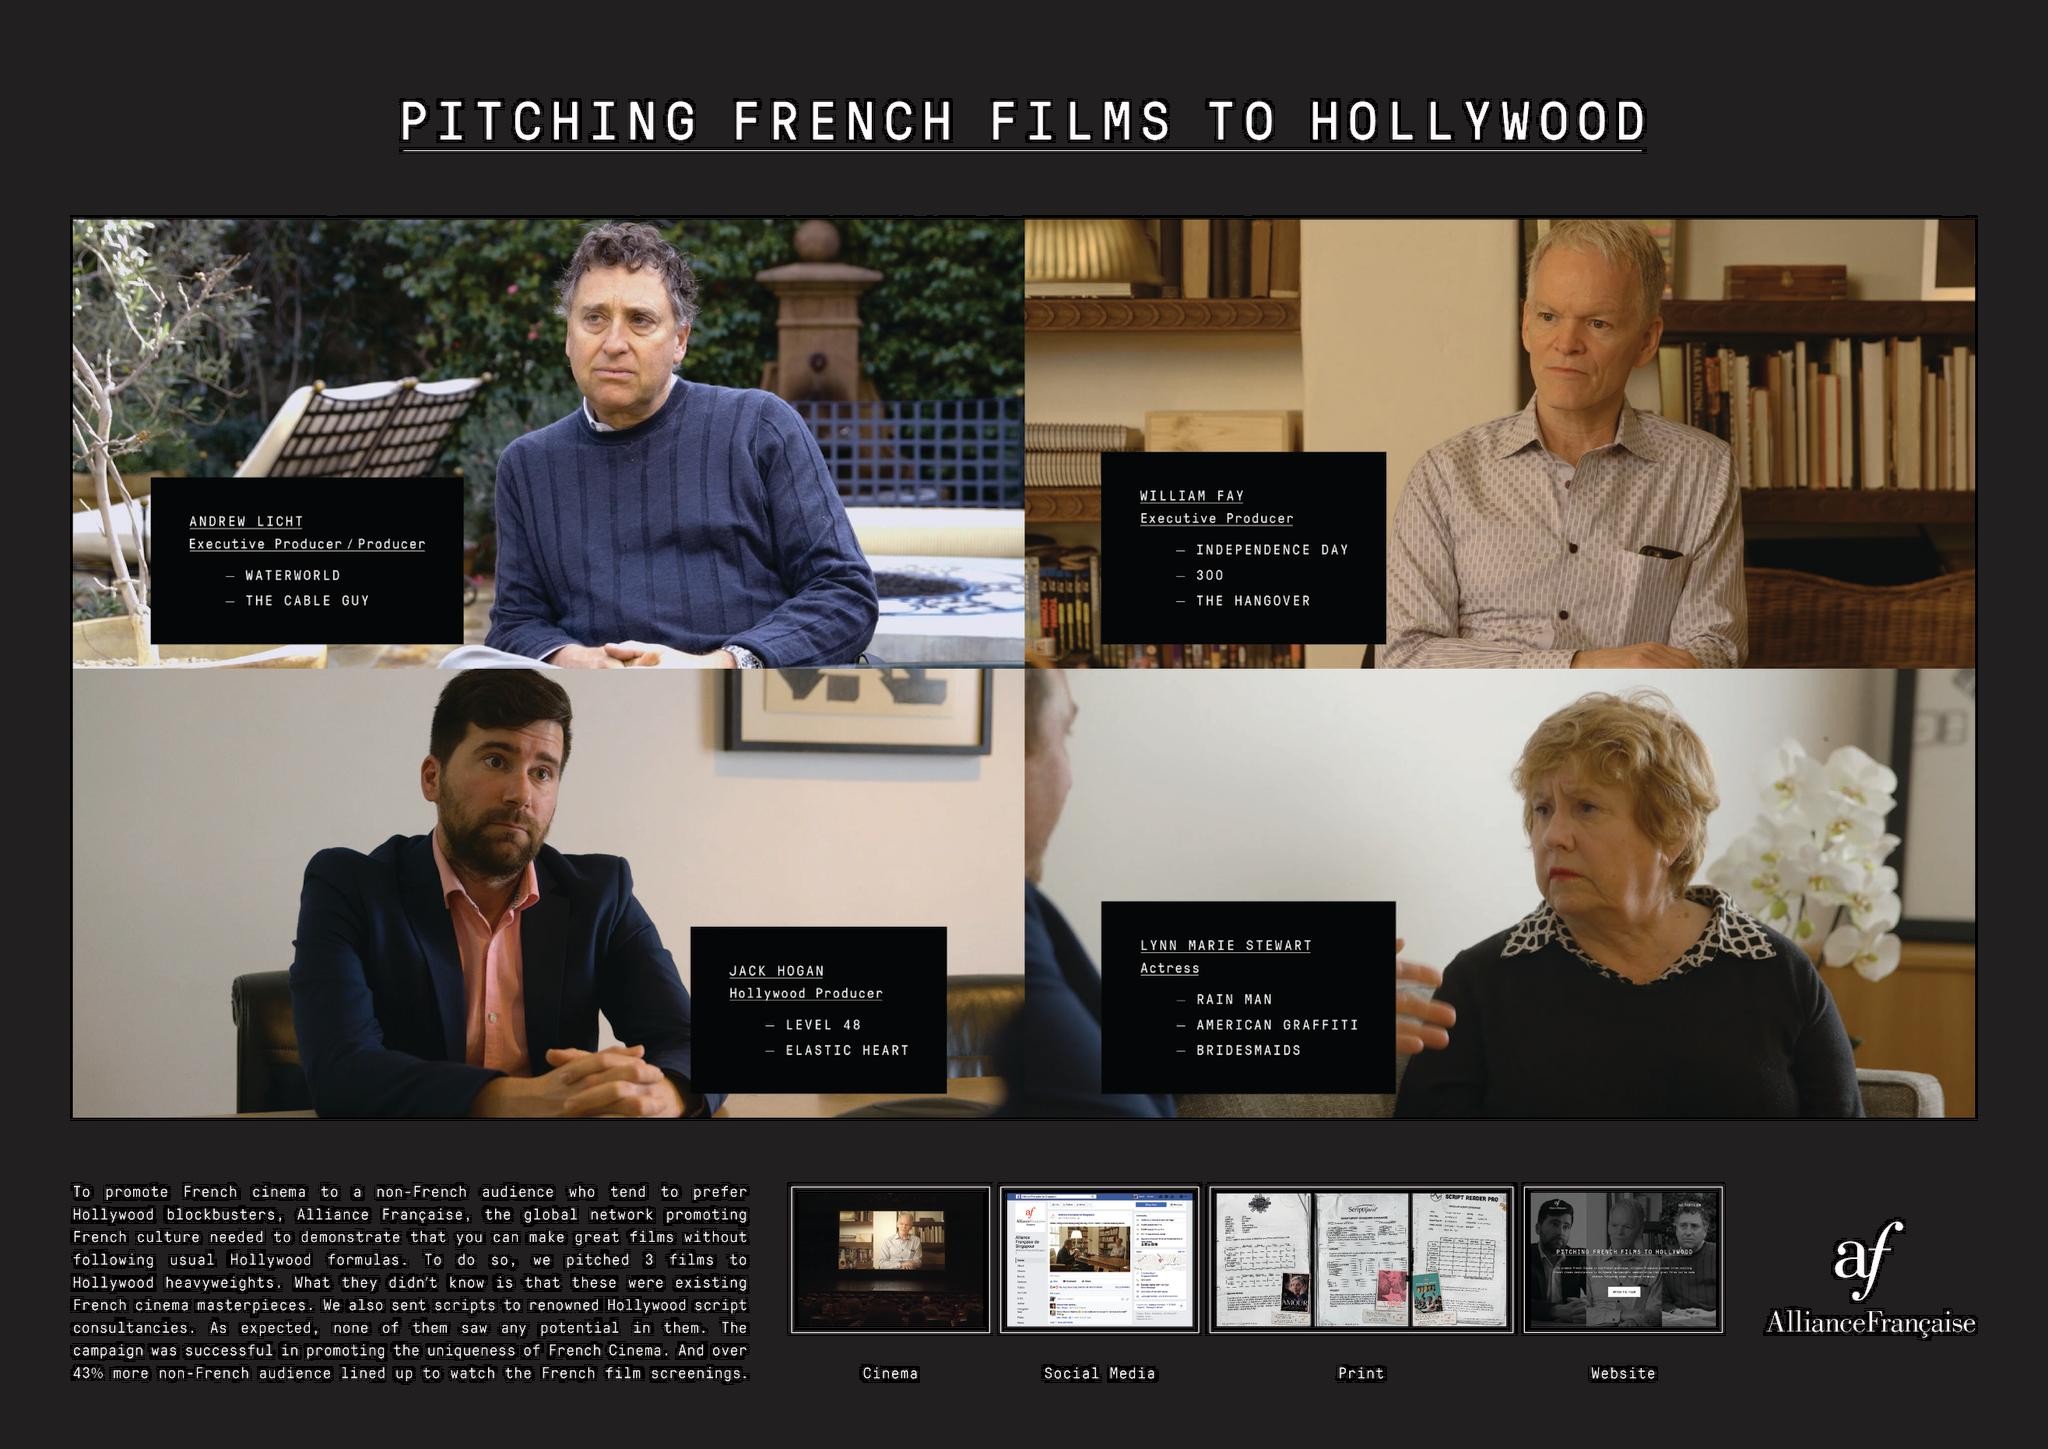 PITCHING FRENCH FILMS TO HOLLYWOOD